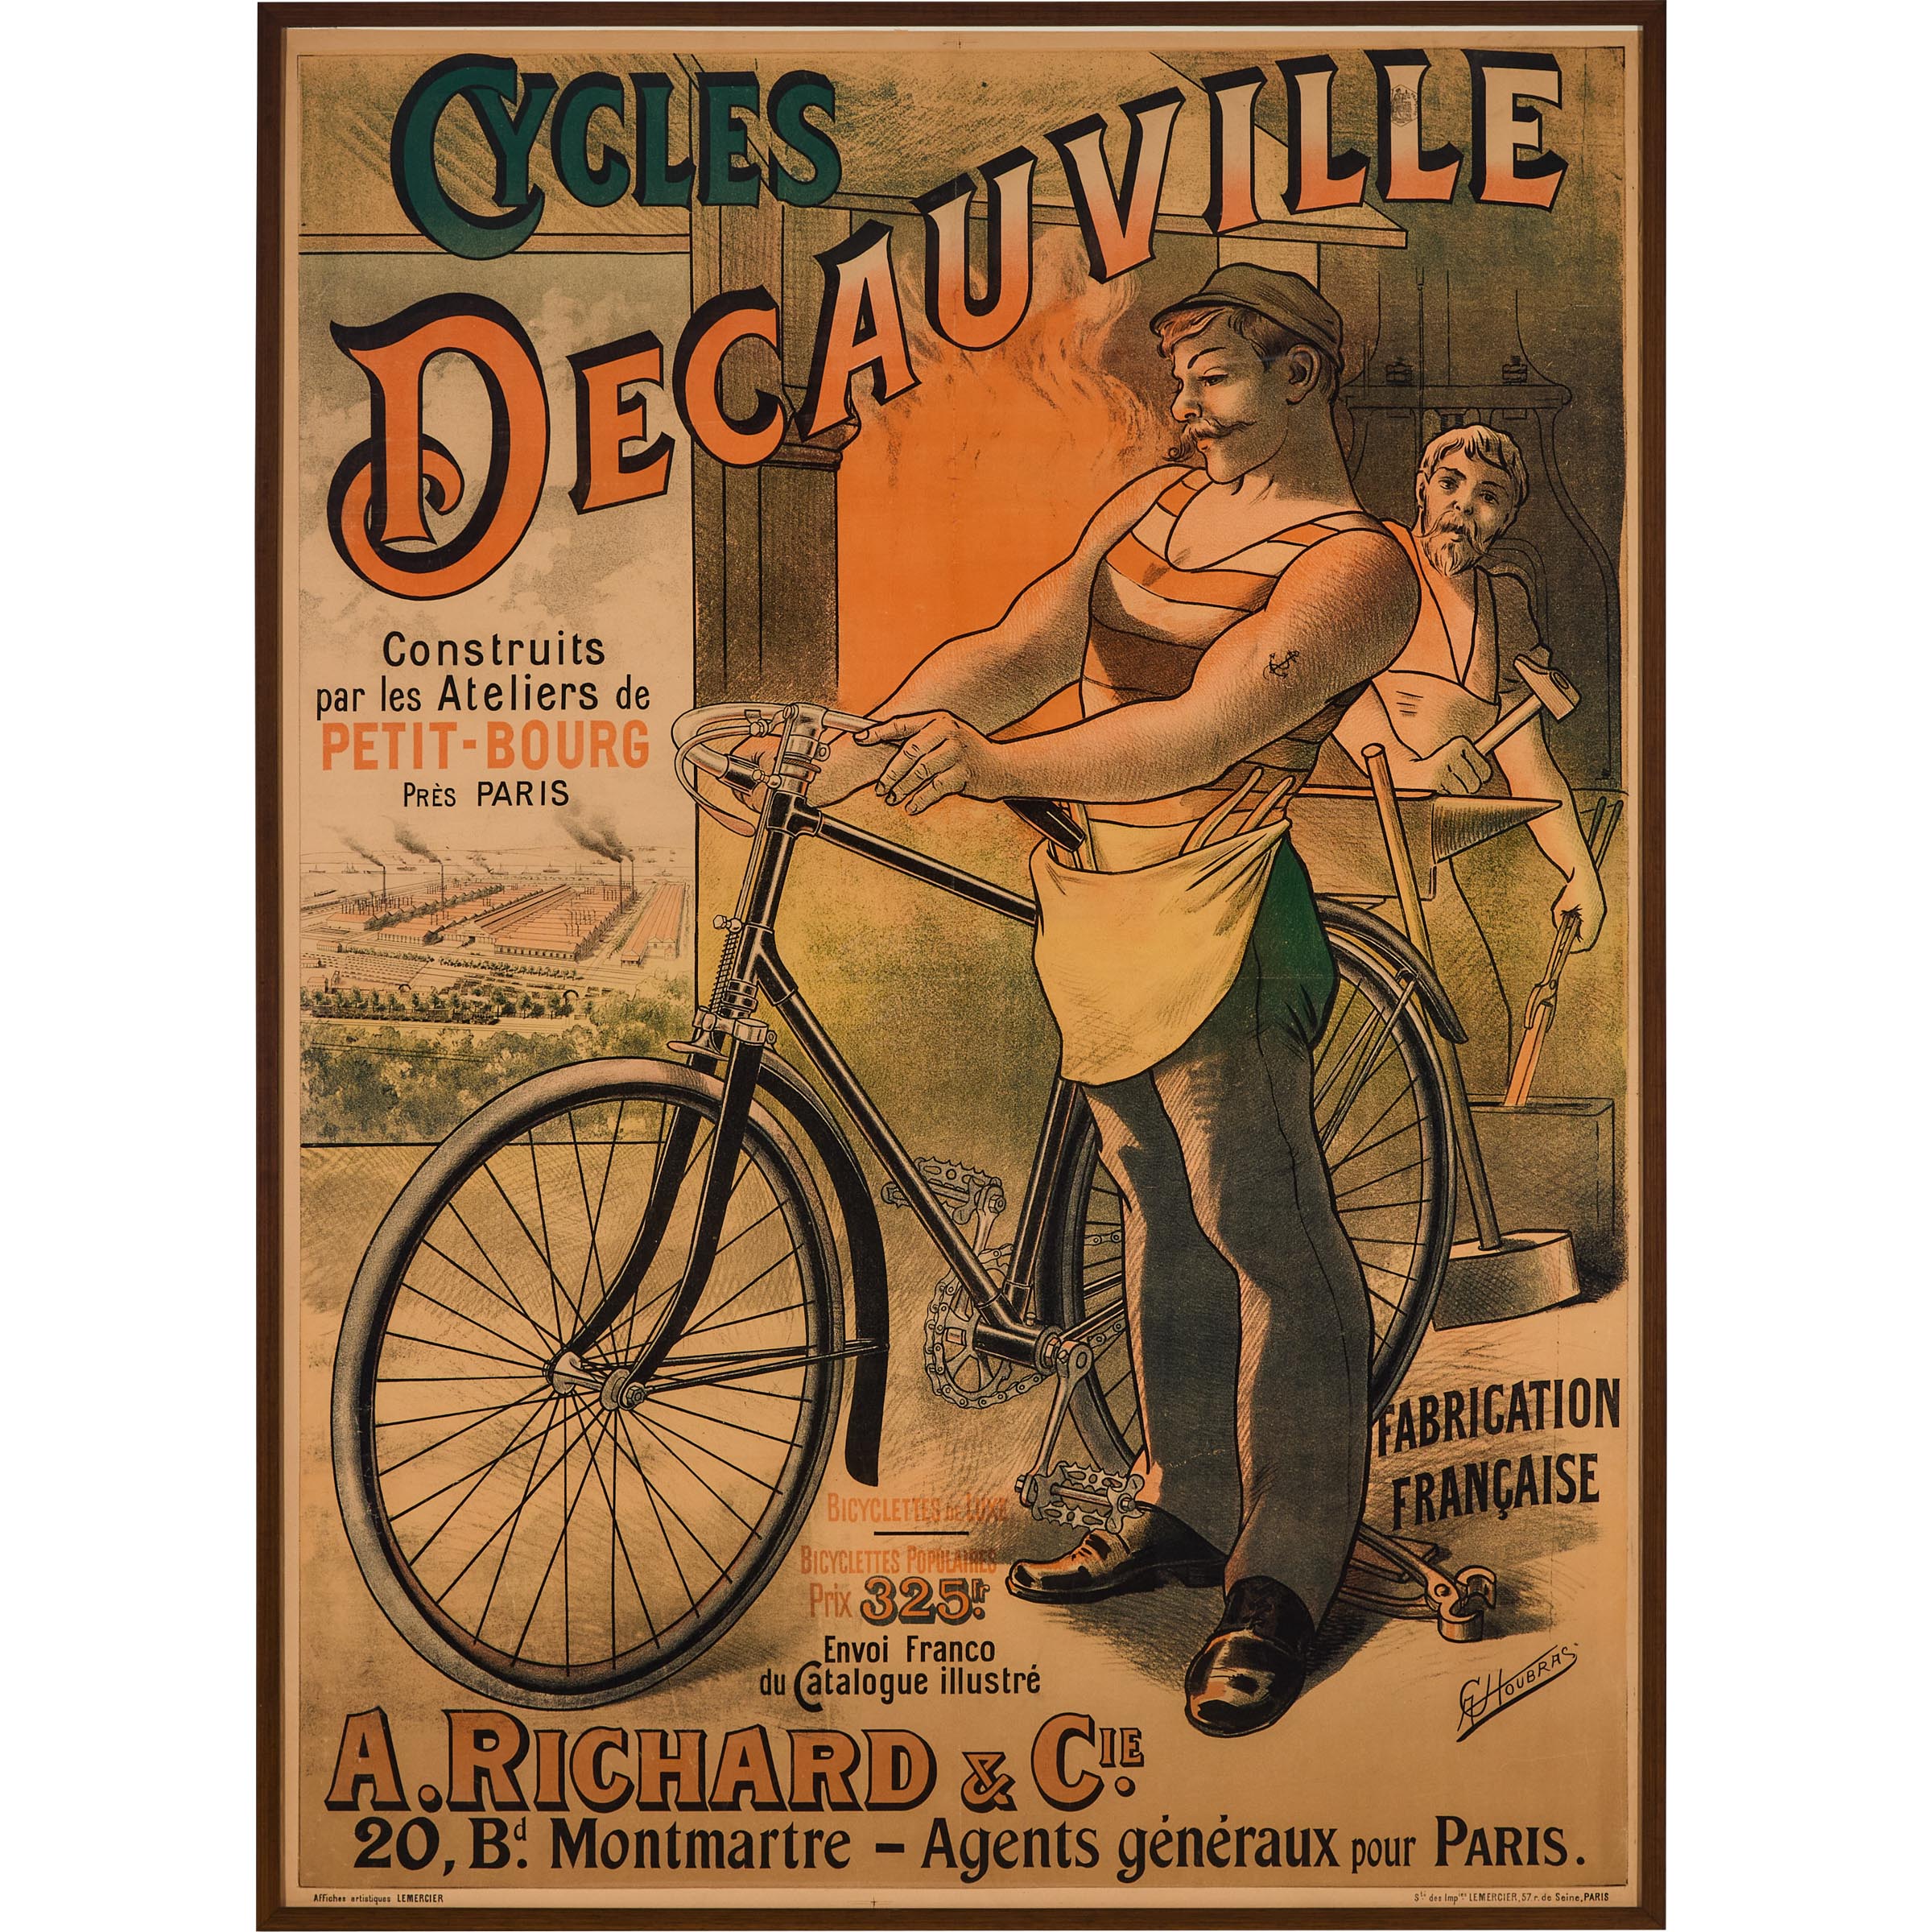 French Large Format Cycles Decauville  2fb03f4